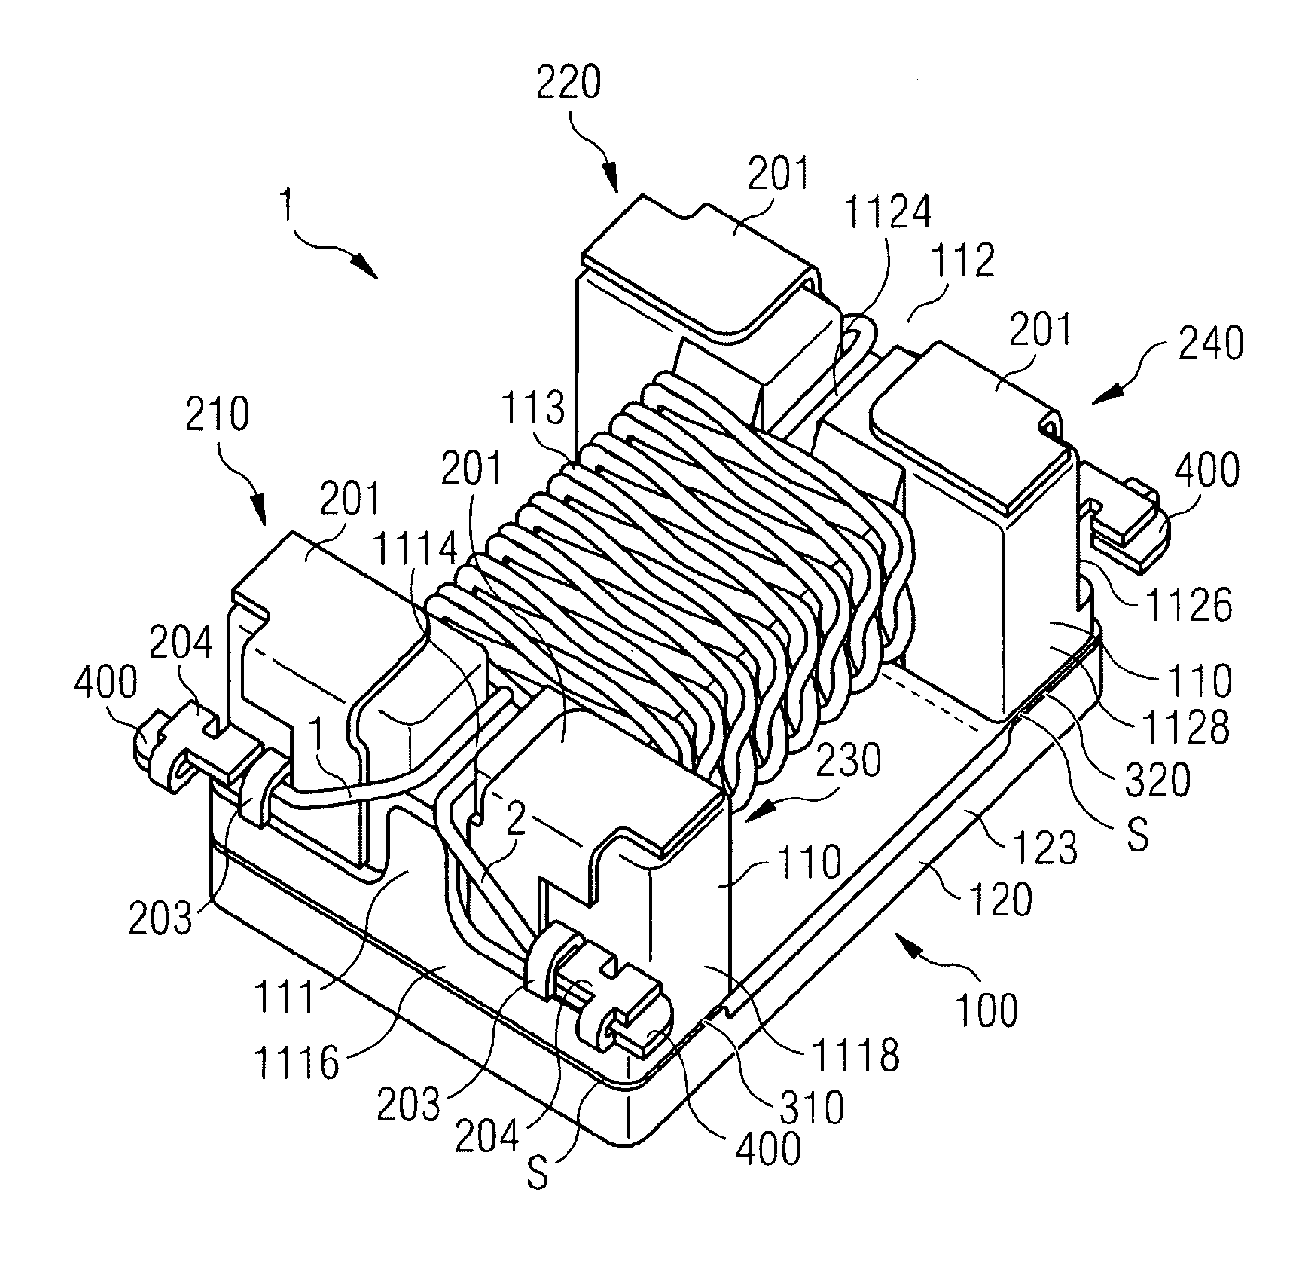 Inductive Component and Method for Producing an Inductive Component